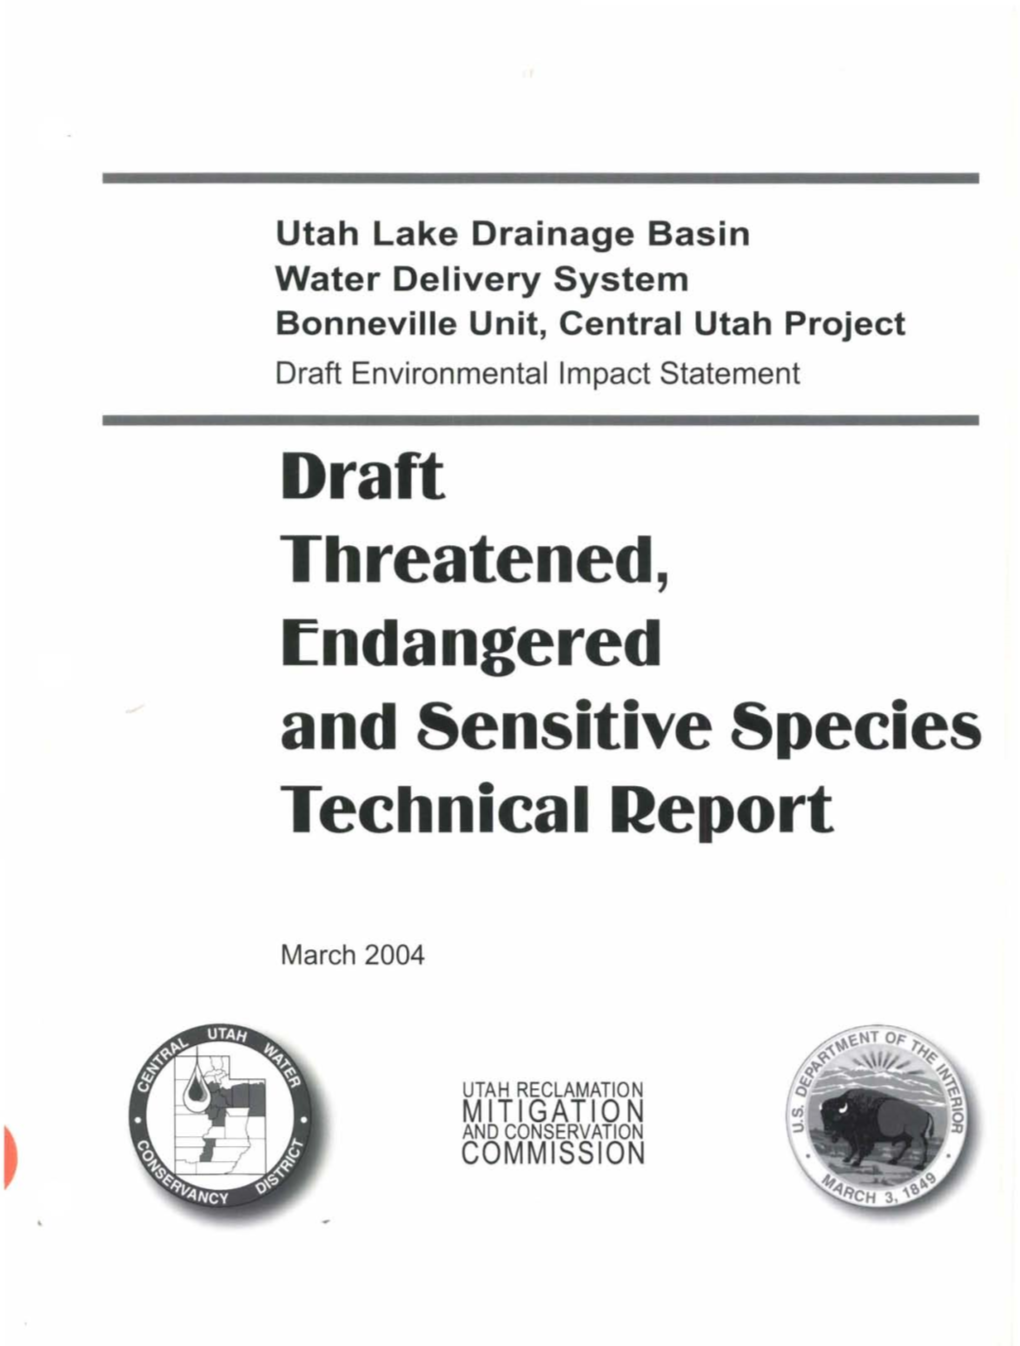 Draft Threatened, Fndangered and Sensitive Species Technical Report